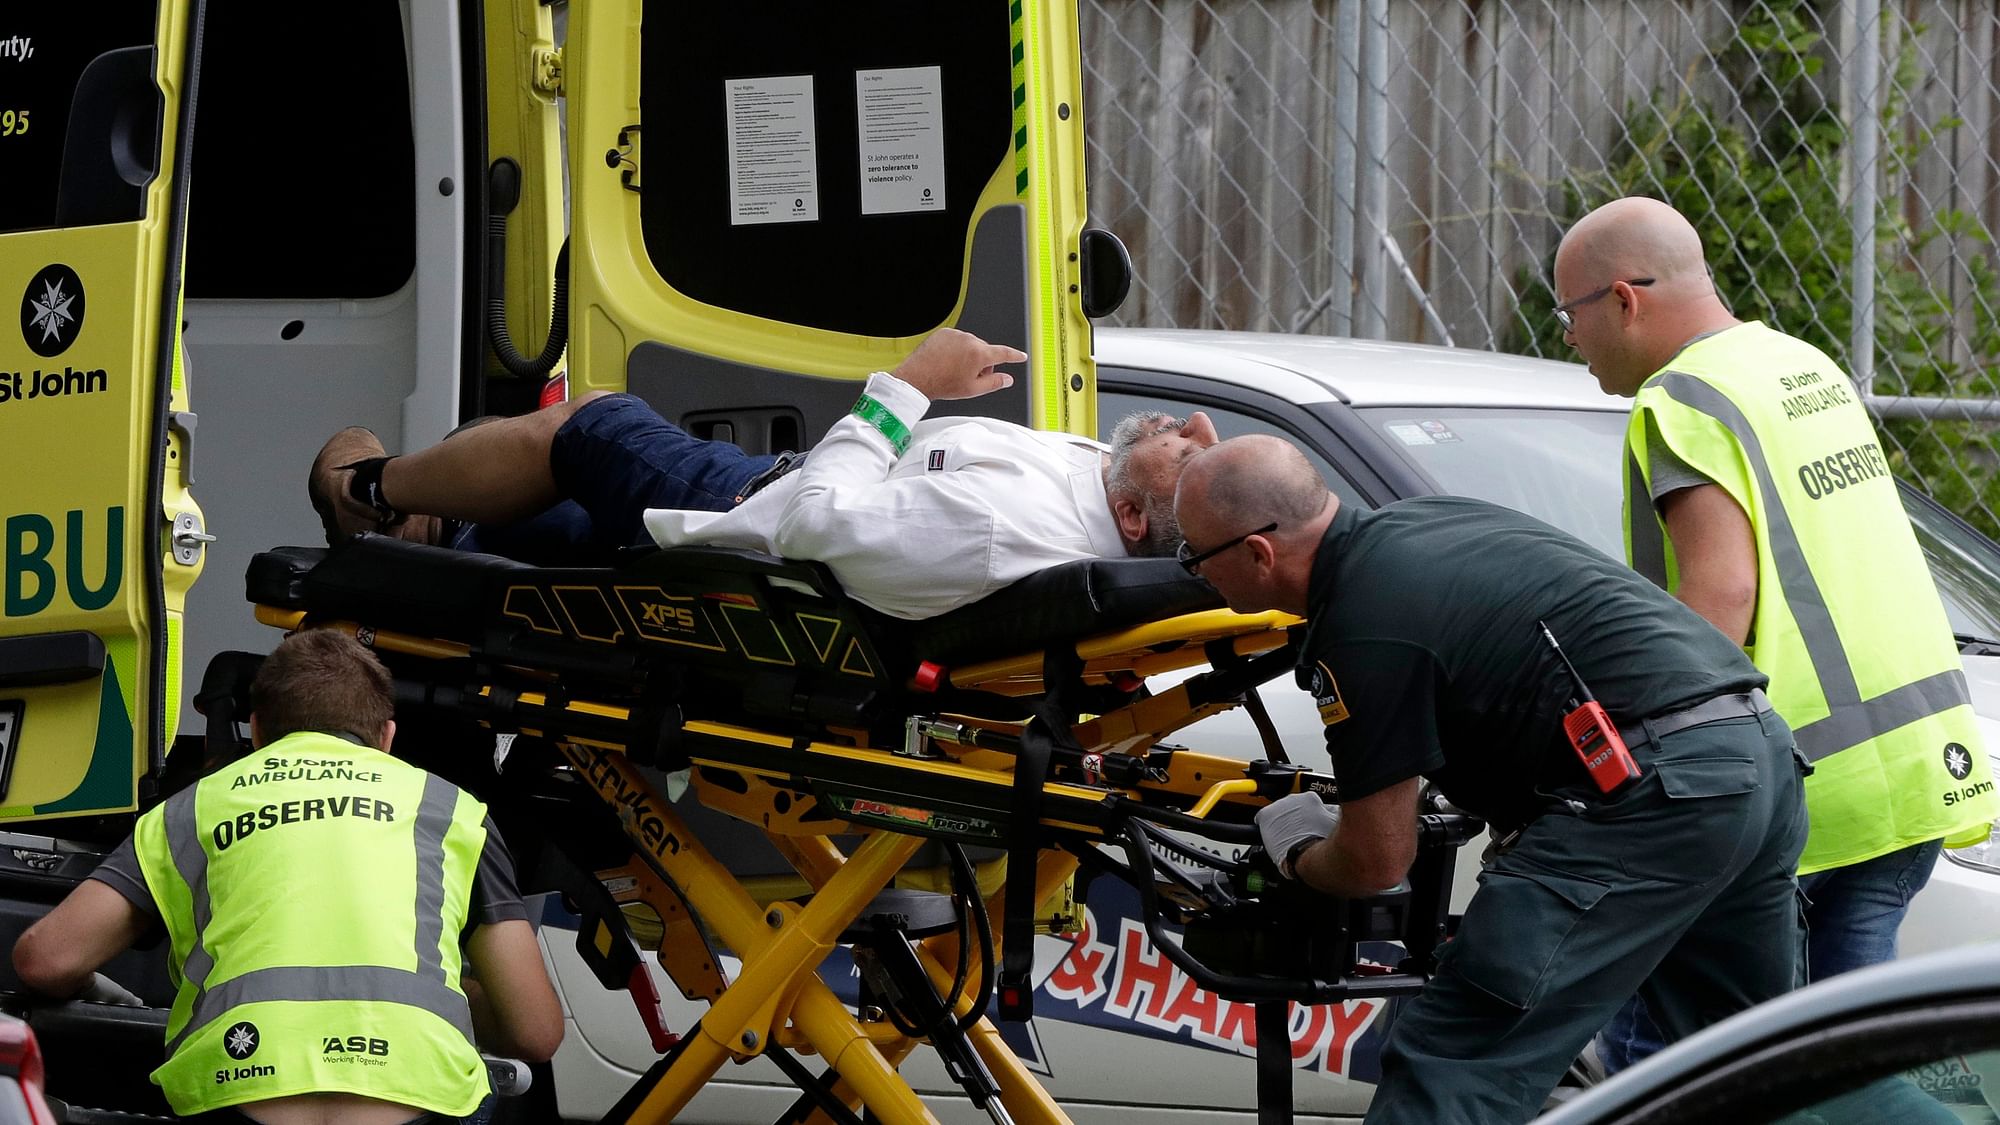 A witness says many people have been killed in a mass shooting at a mosque in the New Zealand city of Christchurch.